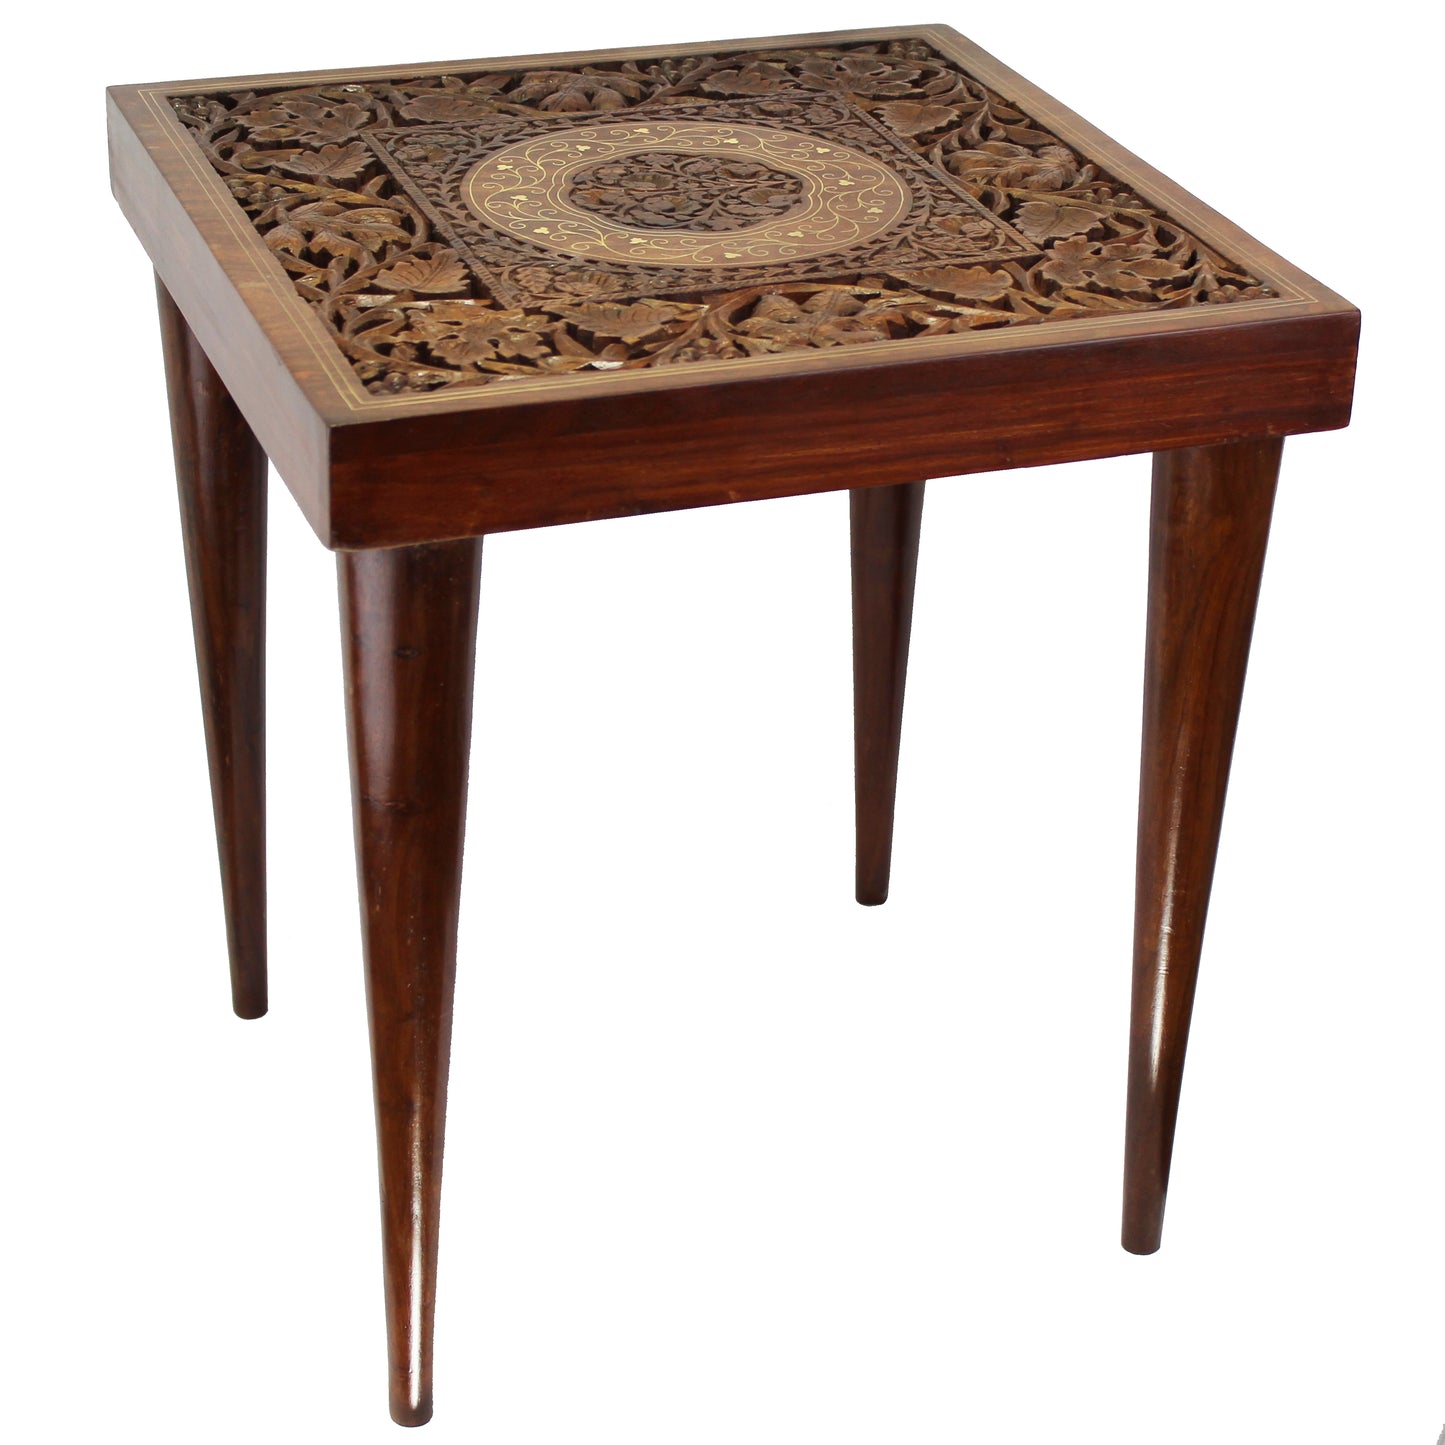 Natural Geo Handcarved Square Rosewood Decorative Accent Table